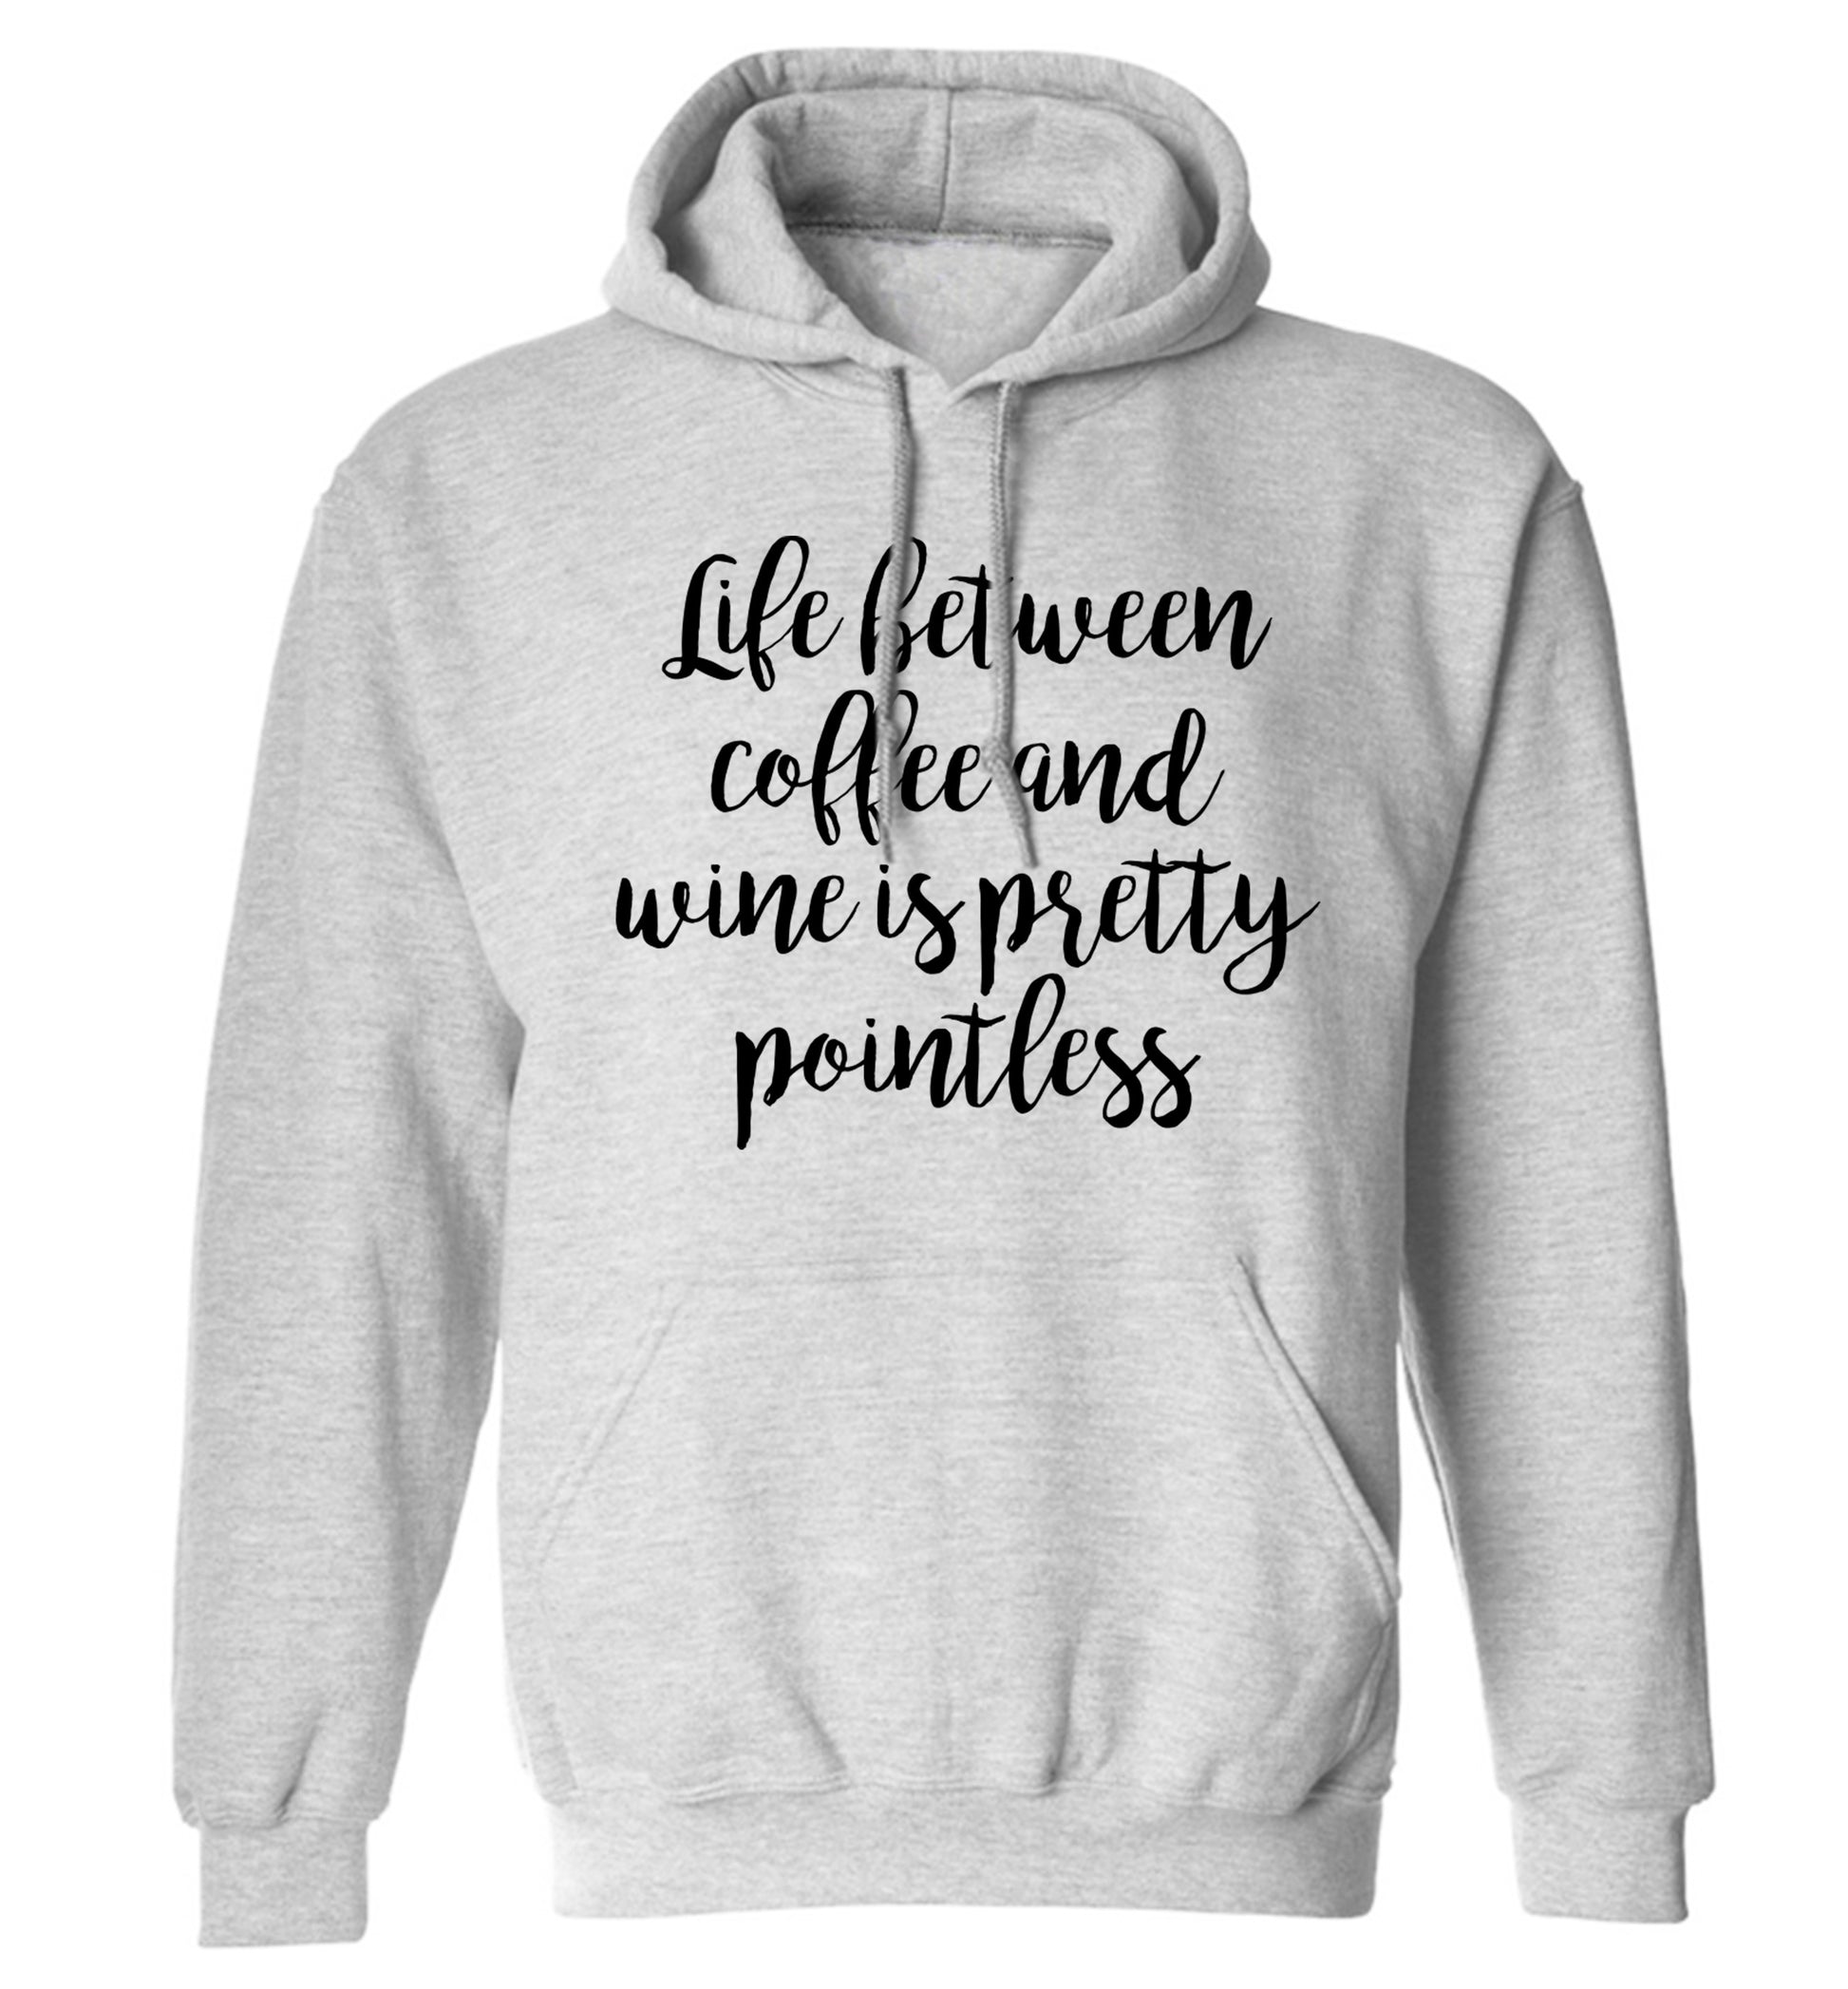 Life between coffee and wine is pretty pointless adults unisex grey hoodie 2XL